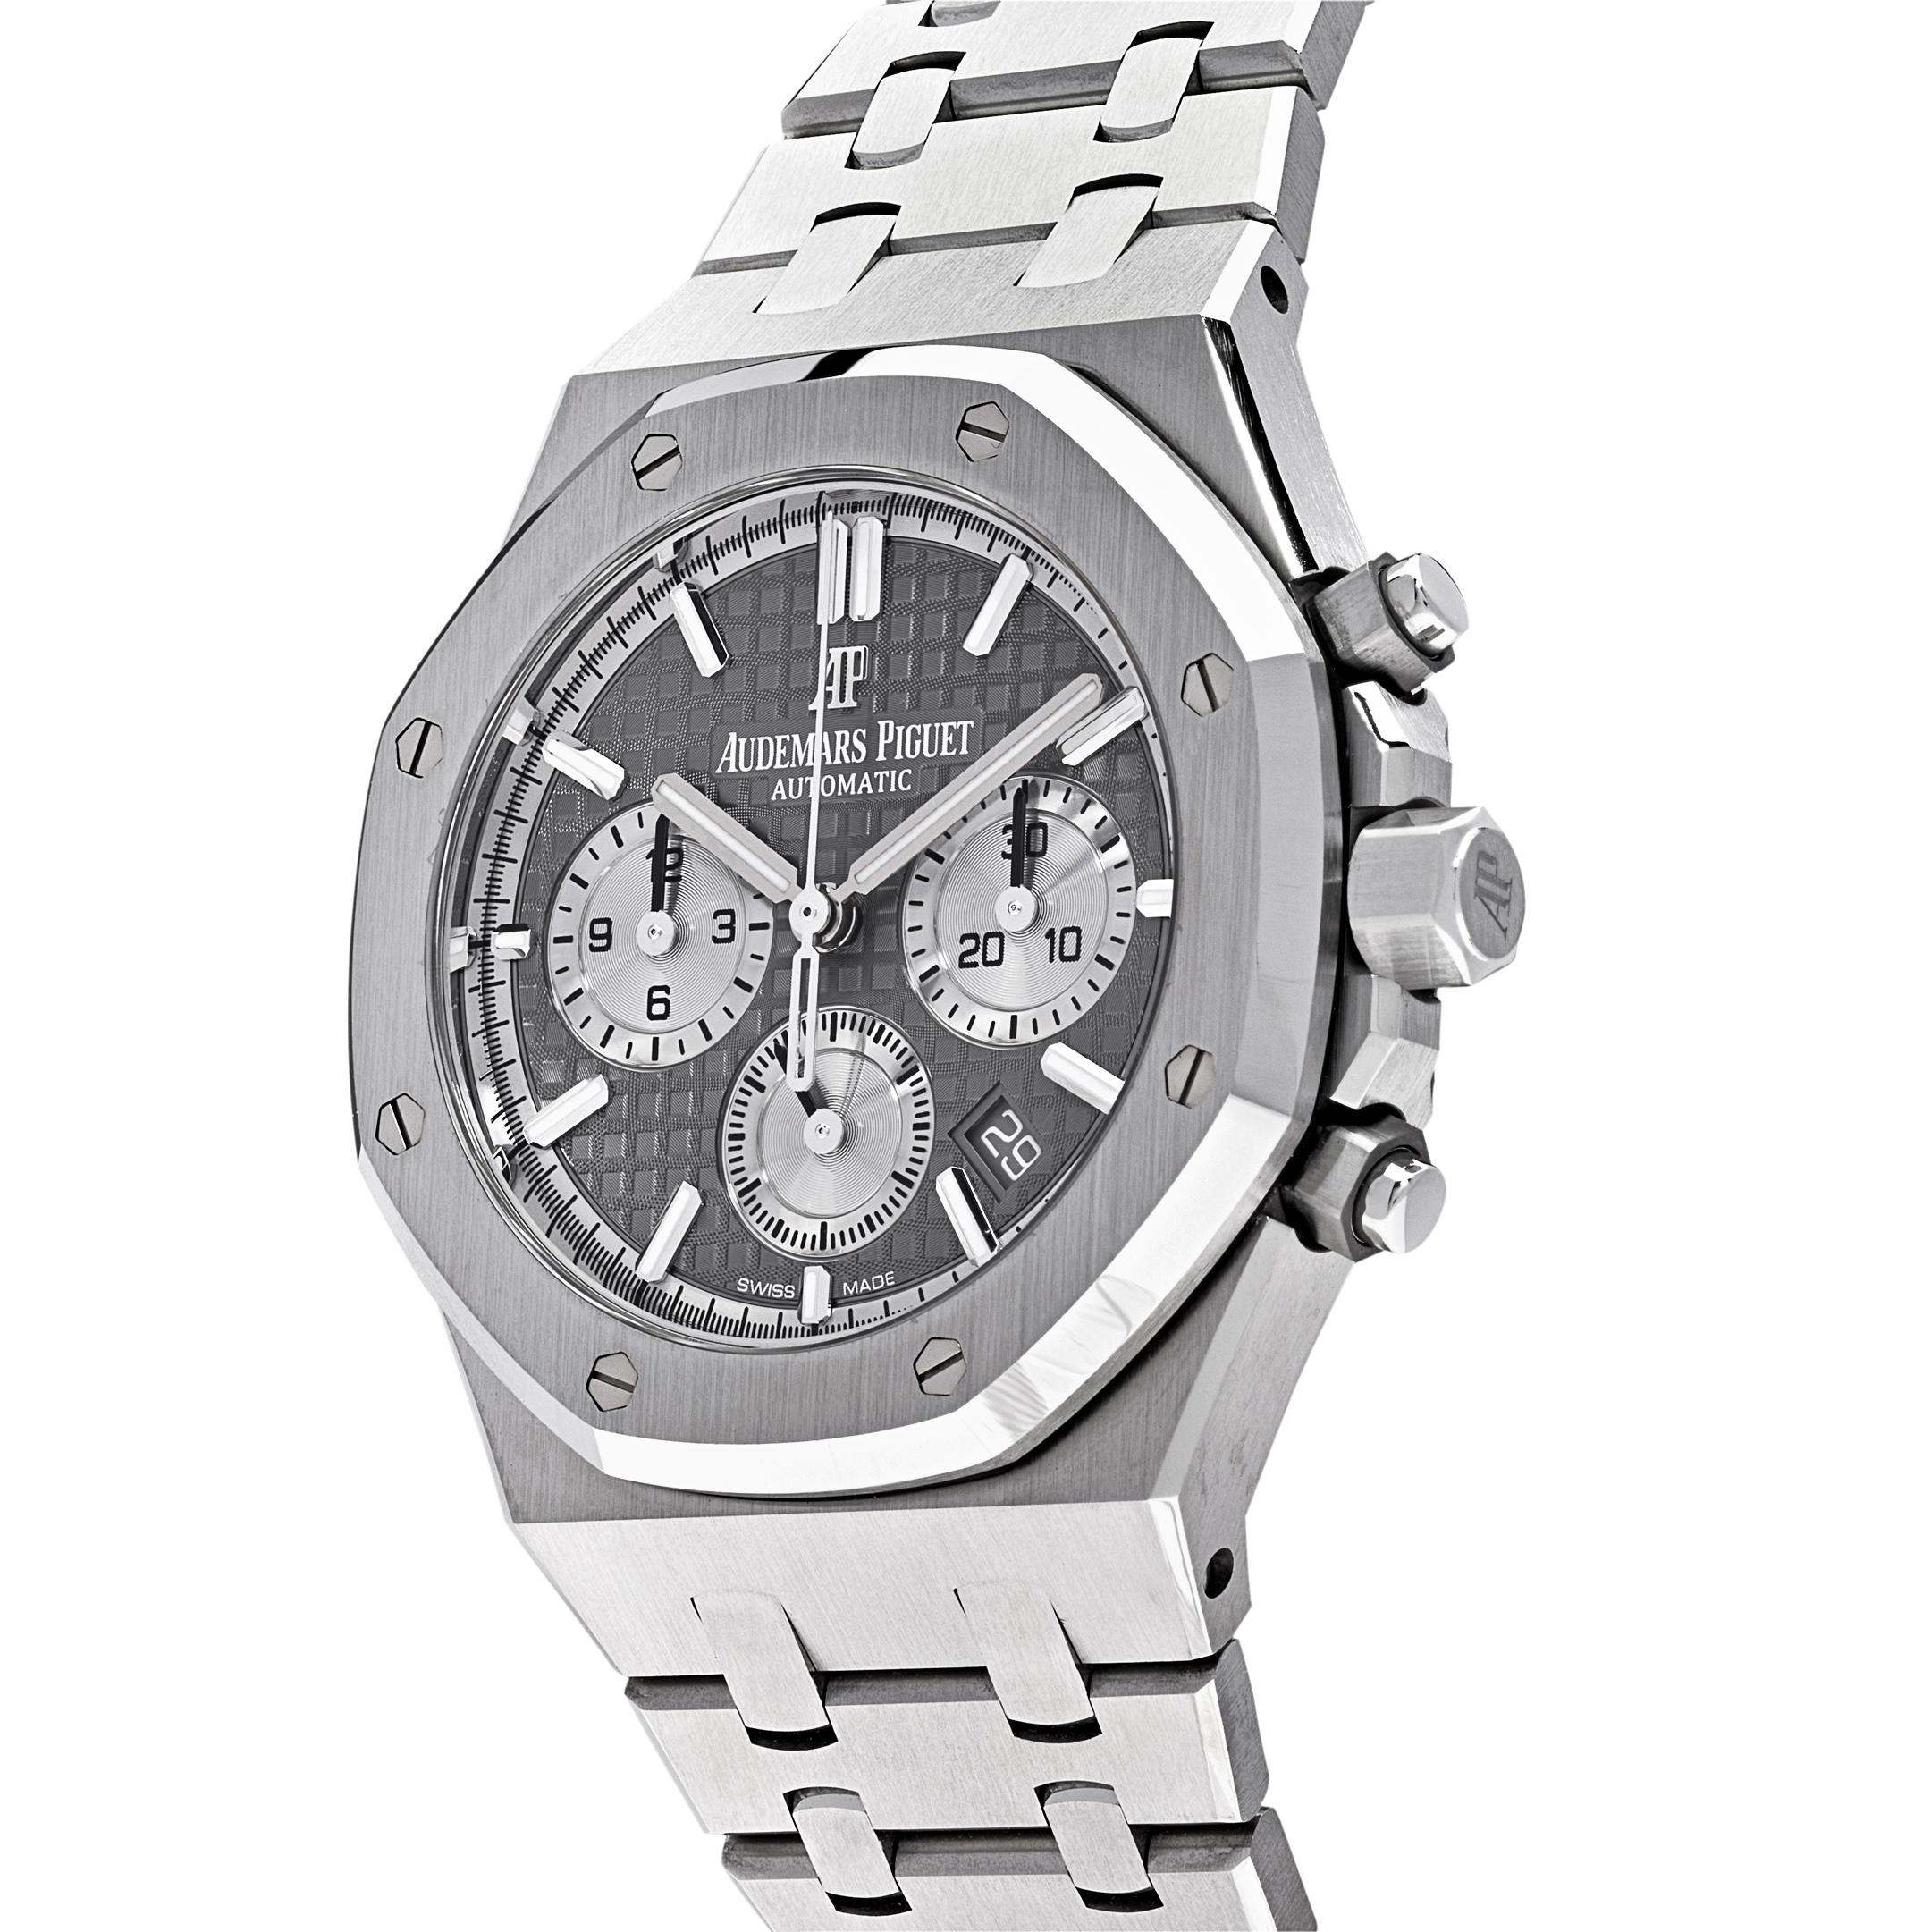 This Audemars Piguet Royal Oak Selfwinding Chronograph features a case made of stainless steel measuring 38mm in diameter, while the bracelet is also crafted from stainless steel. The grey dial features chronograph subdials and a date window at the